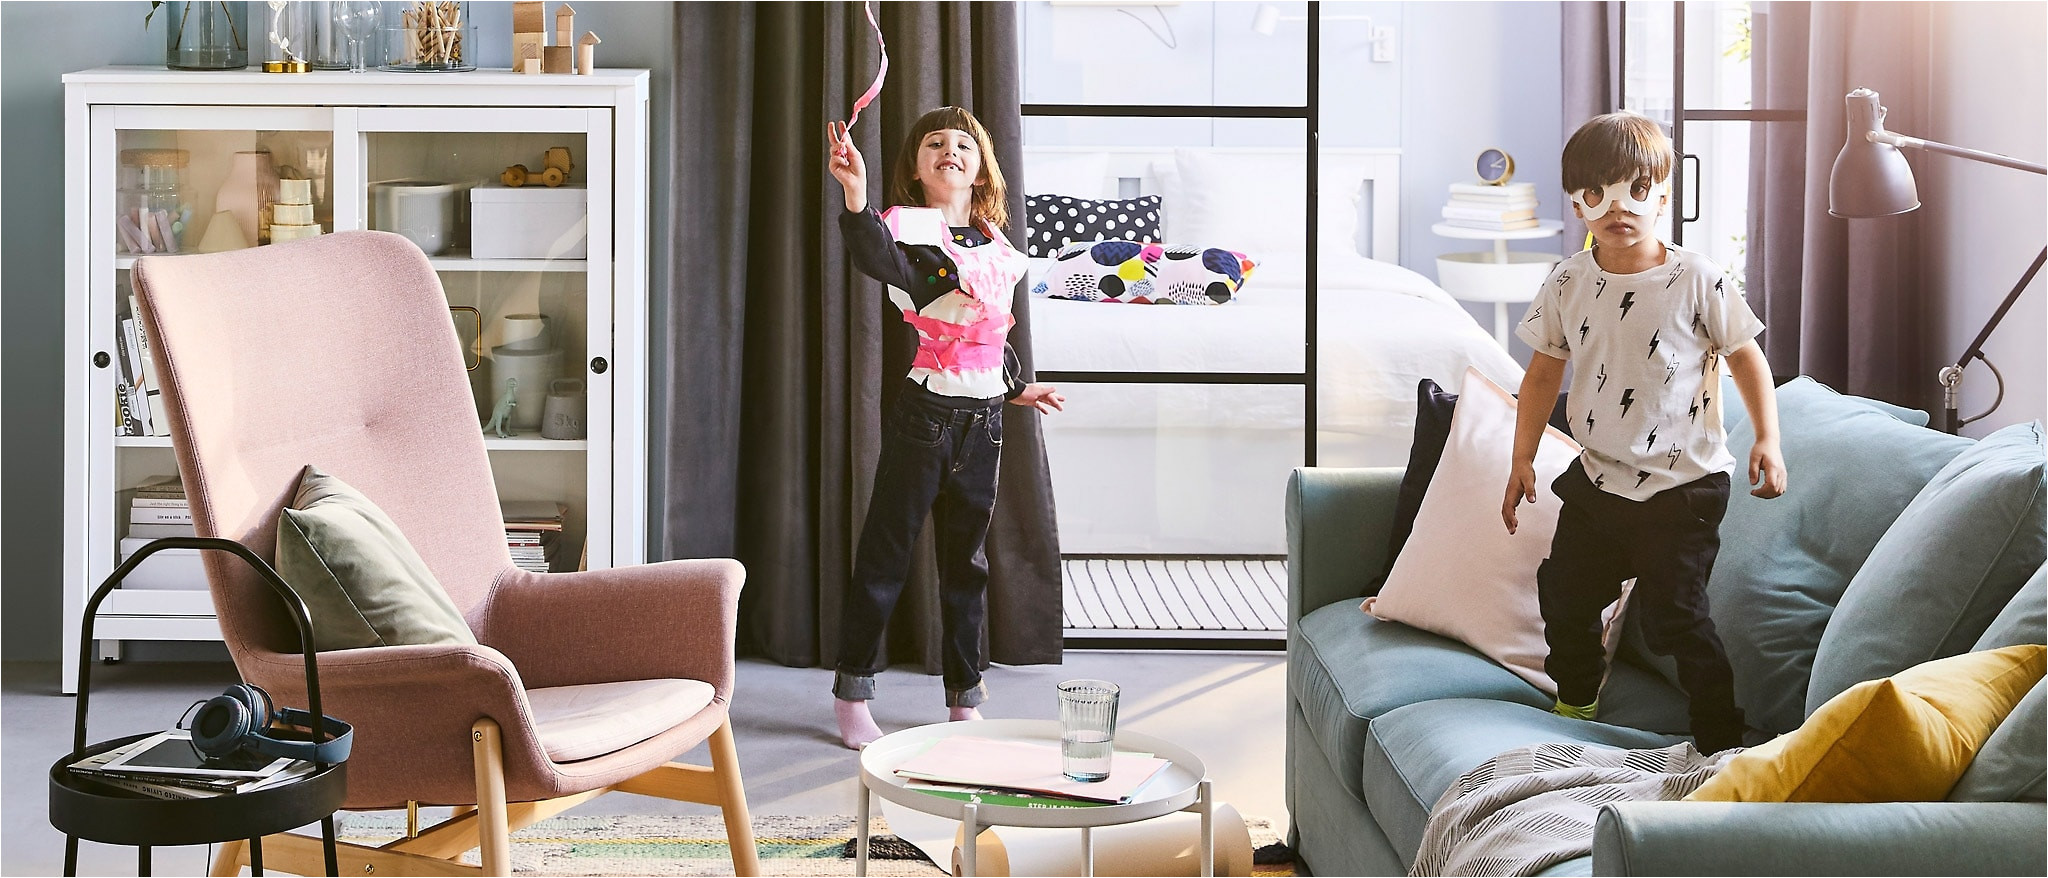 the 2019 ikea catalogue cover features two children playing in a living room they can